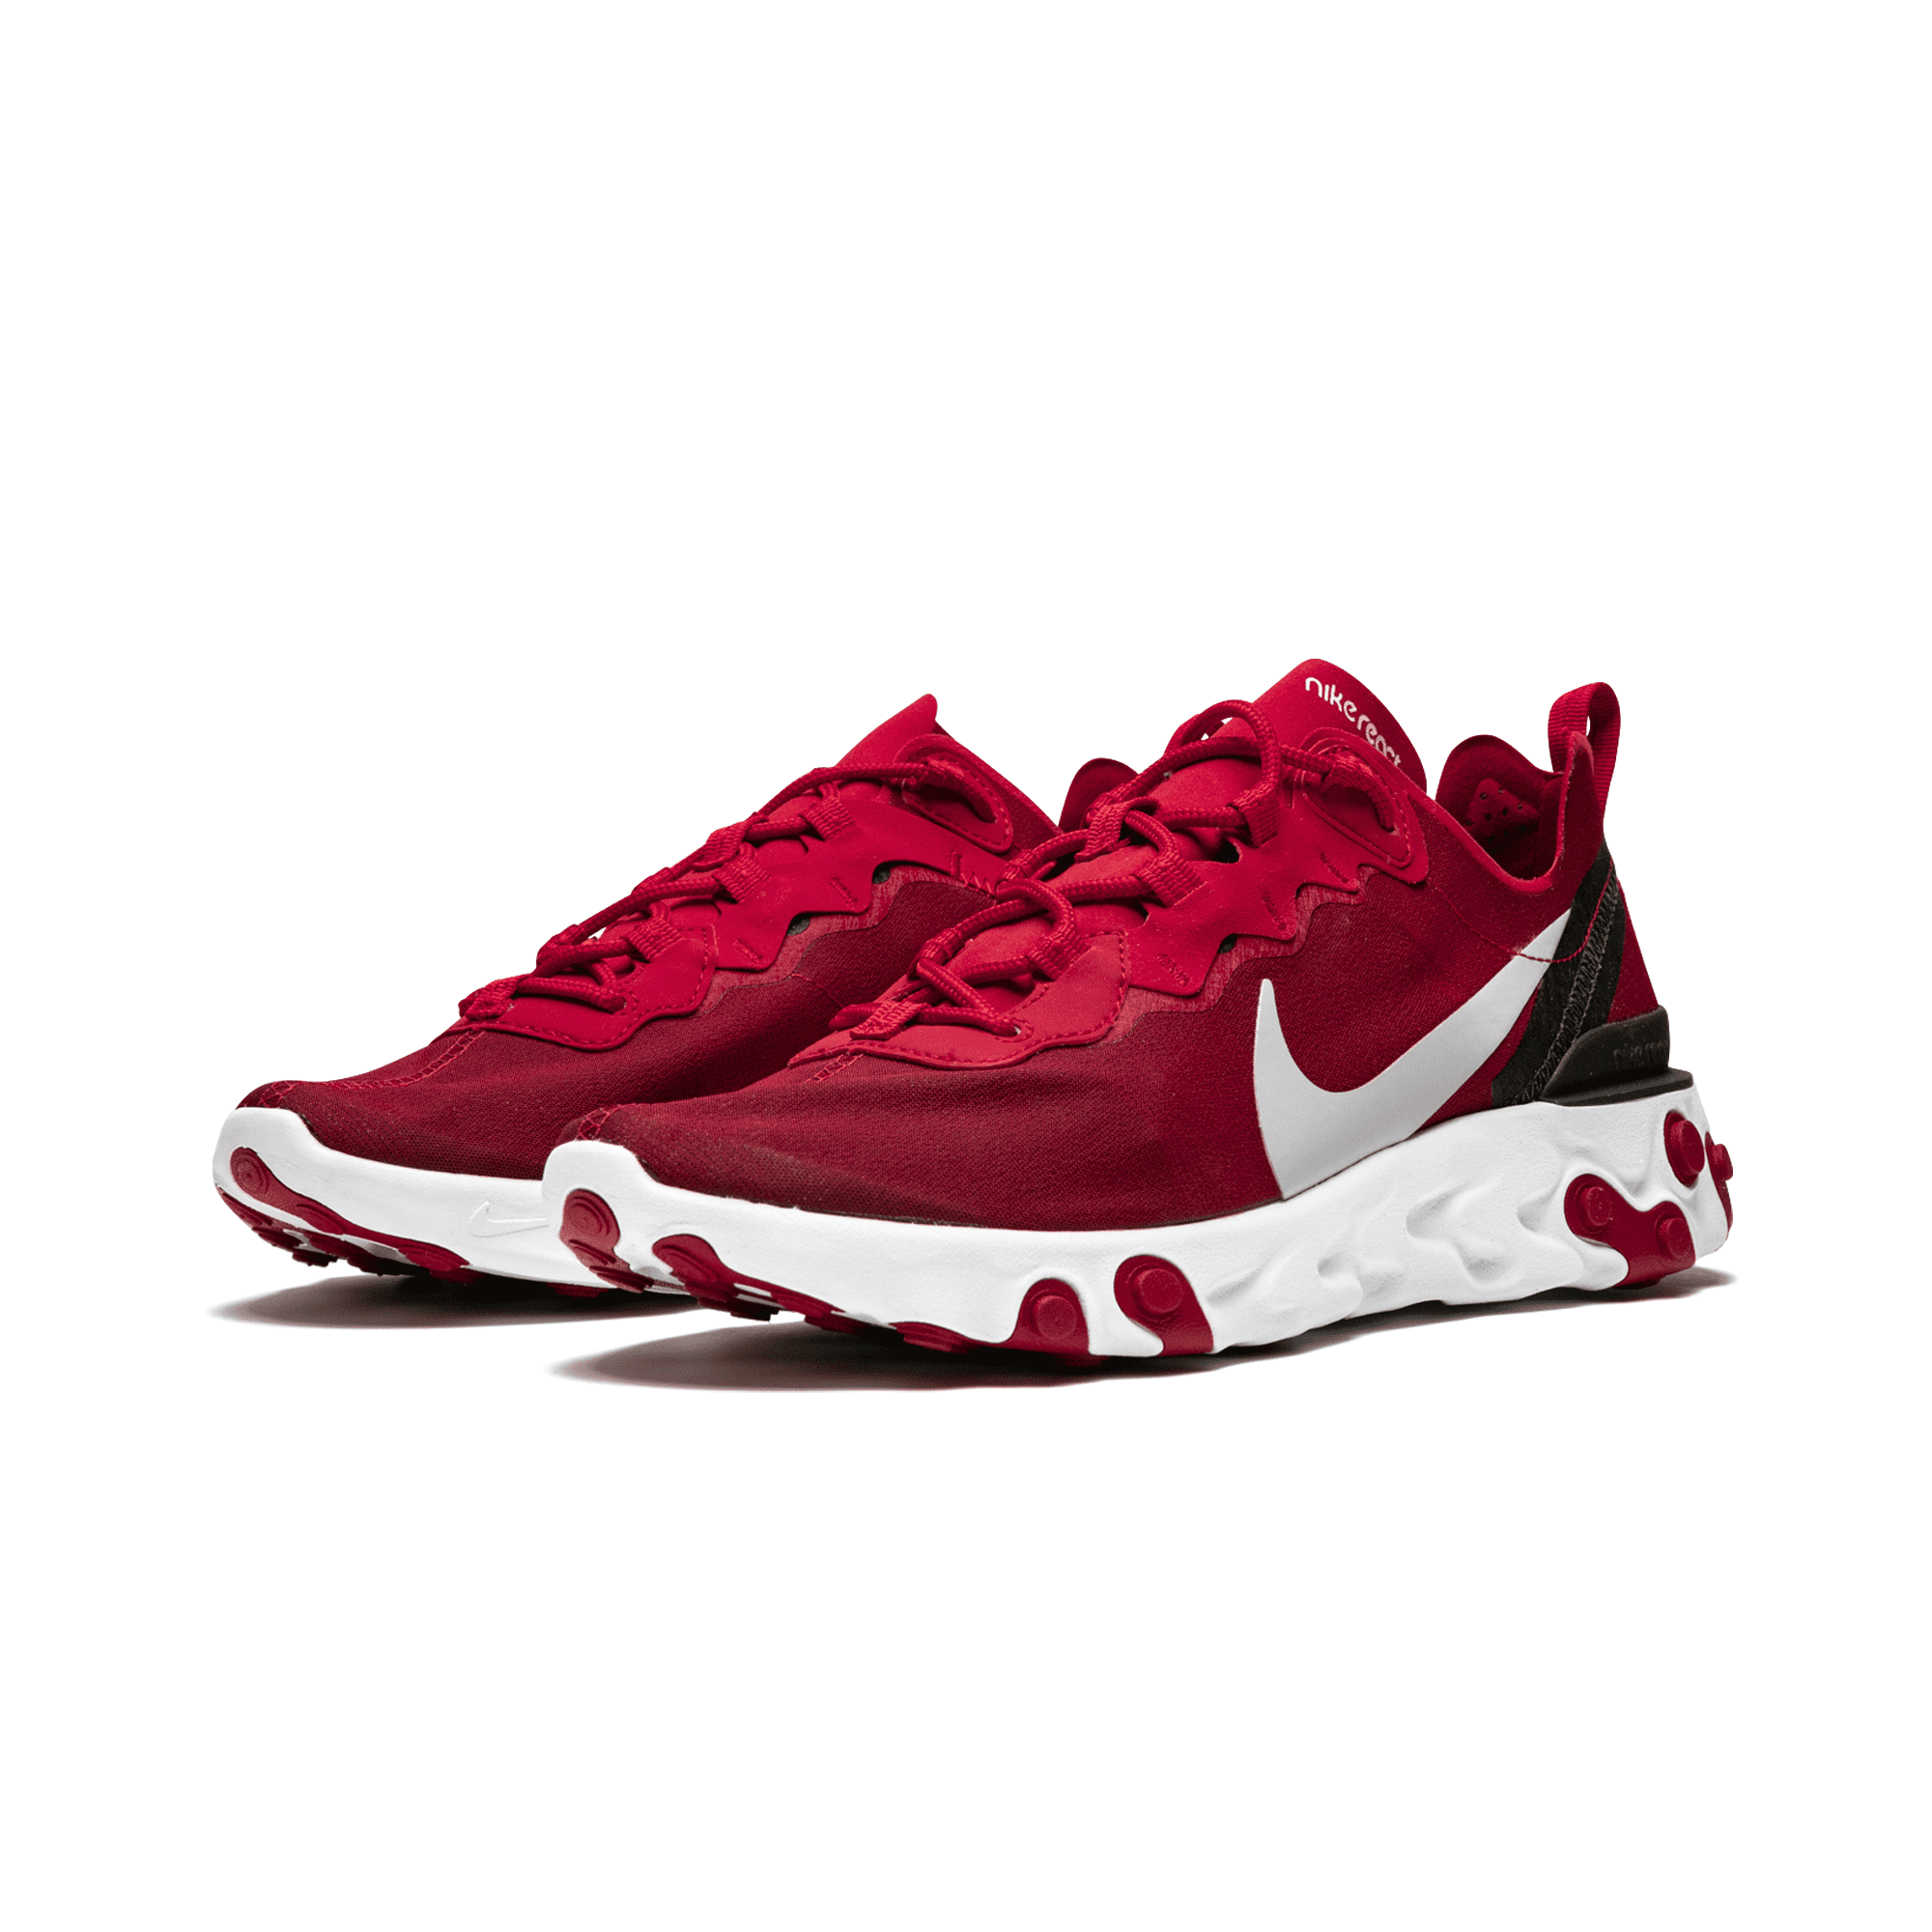 React Element 55  “Gym Red” (4304081125448)